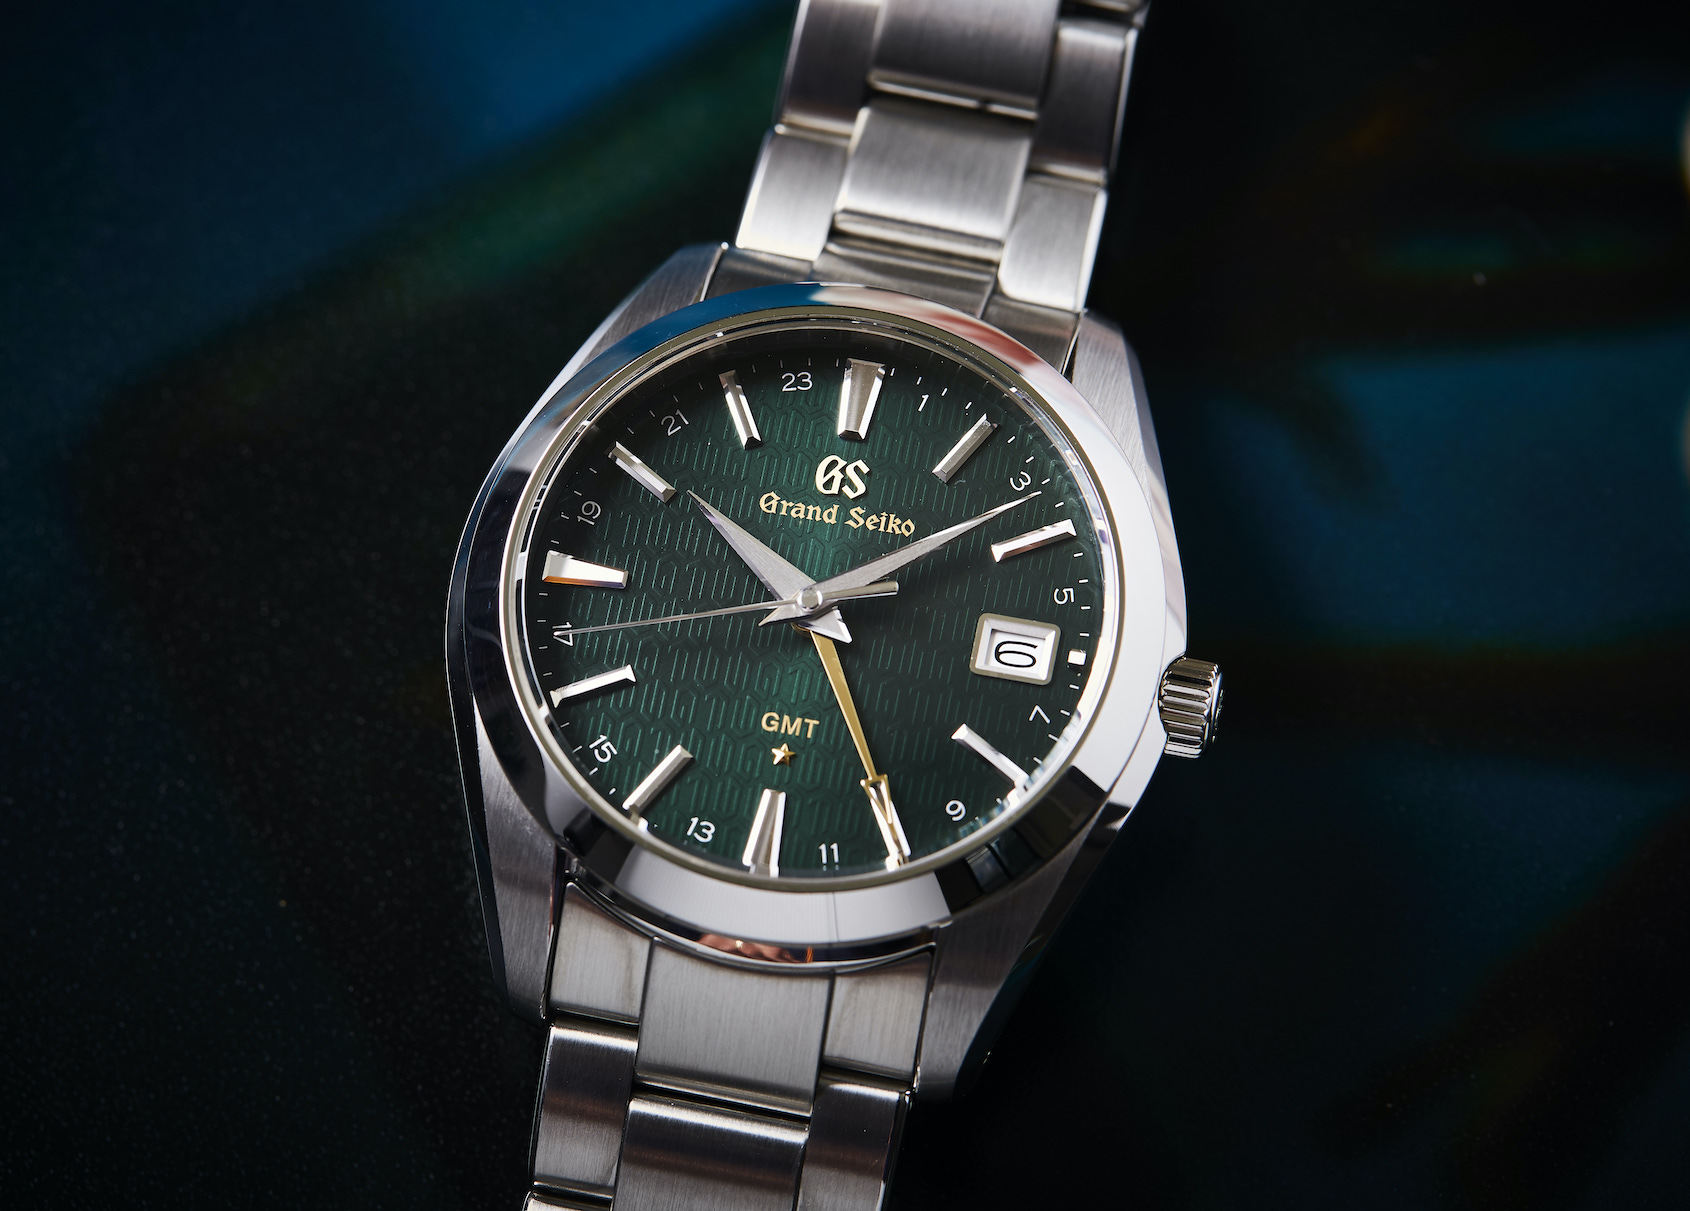 VIDEO: Why I bought a quartz Grand Seiko SBGN007 as my first “good watch”